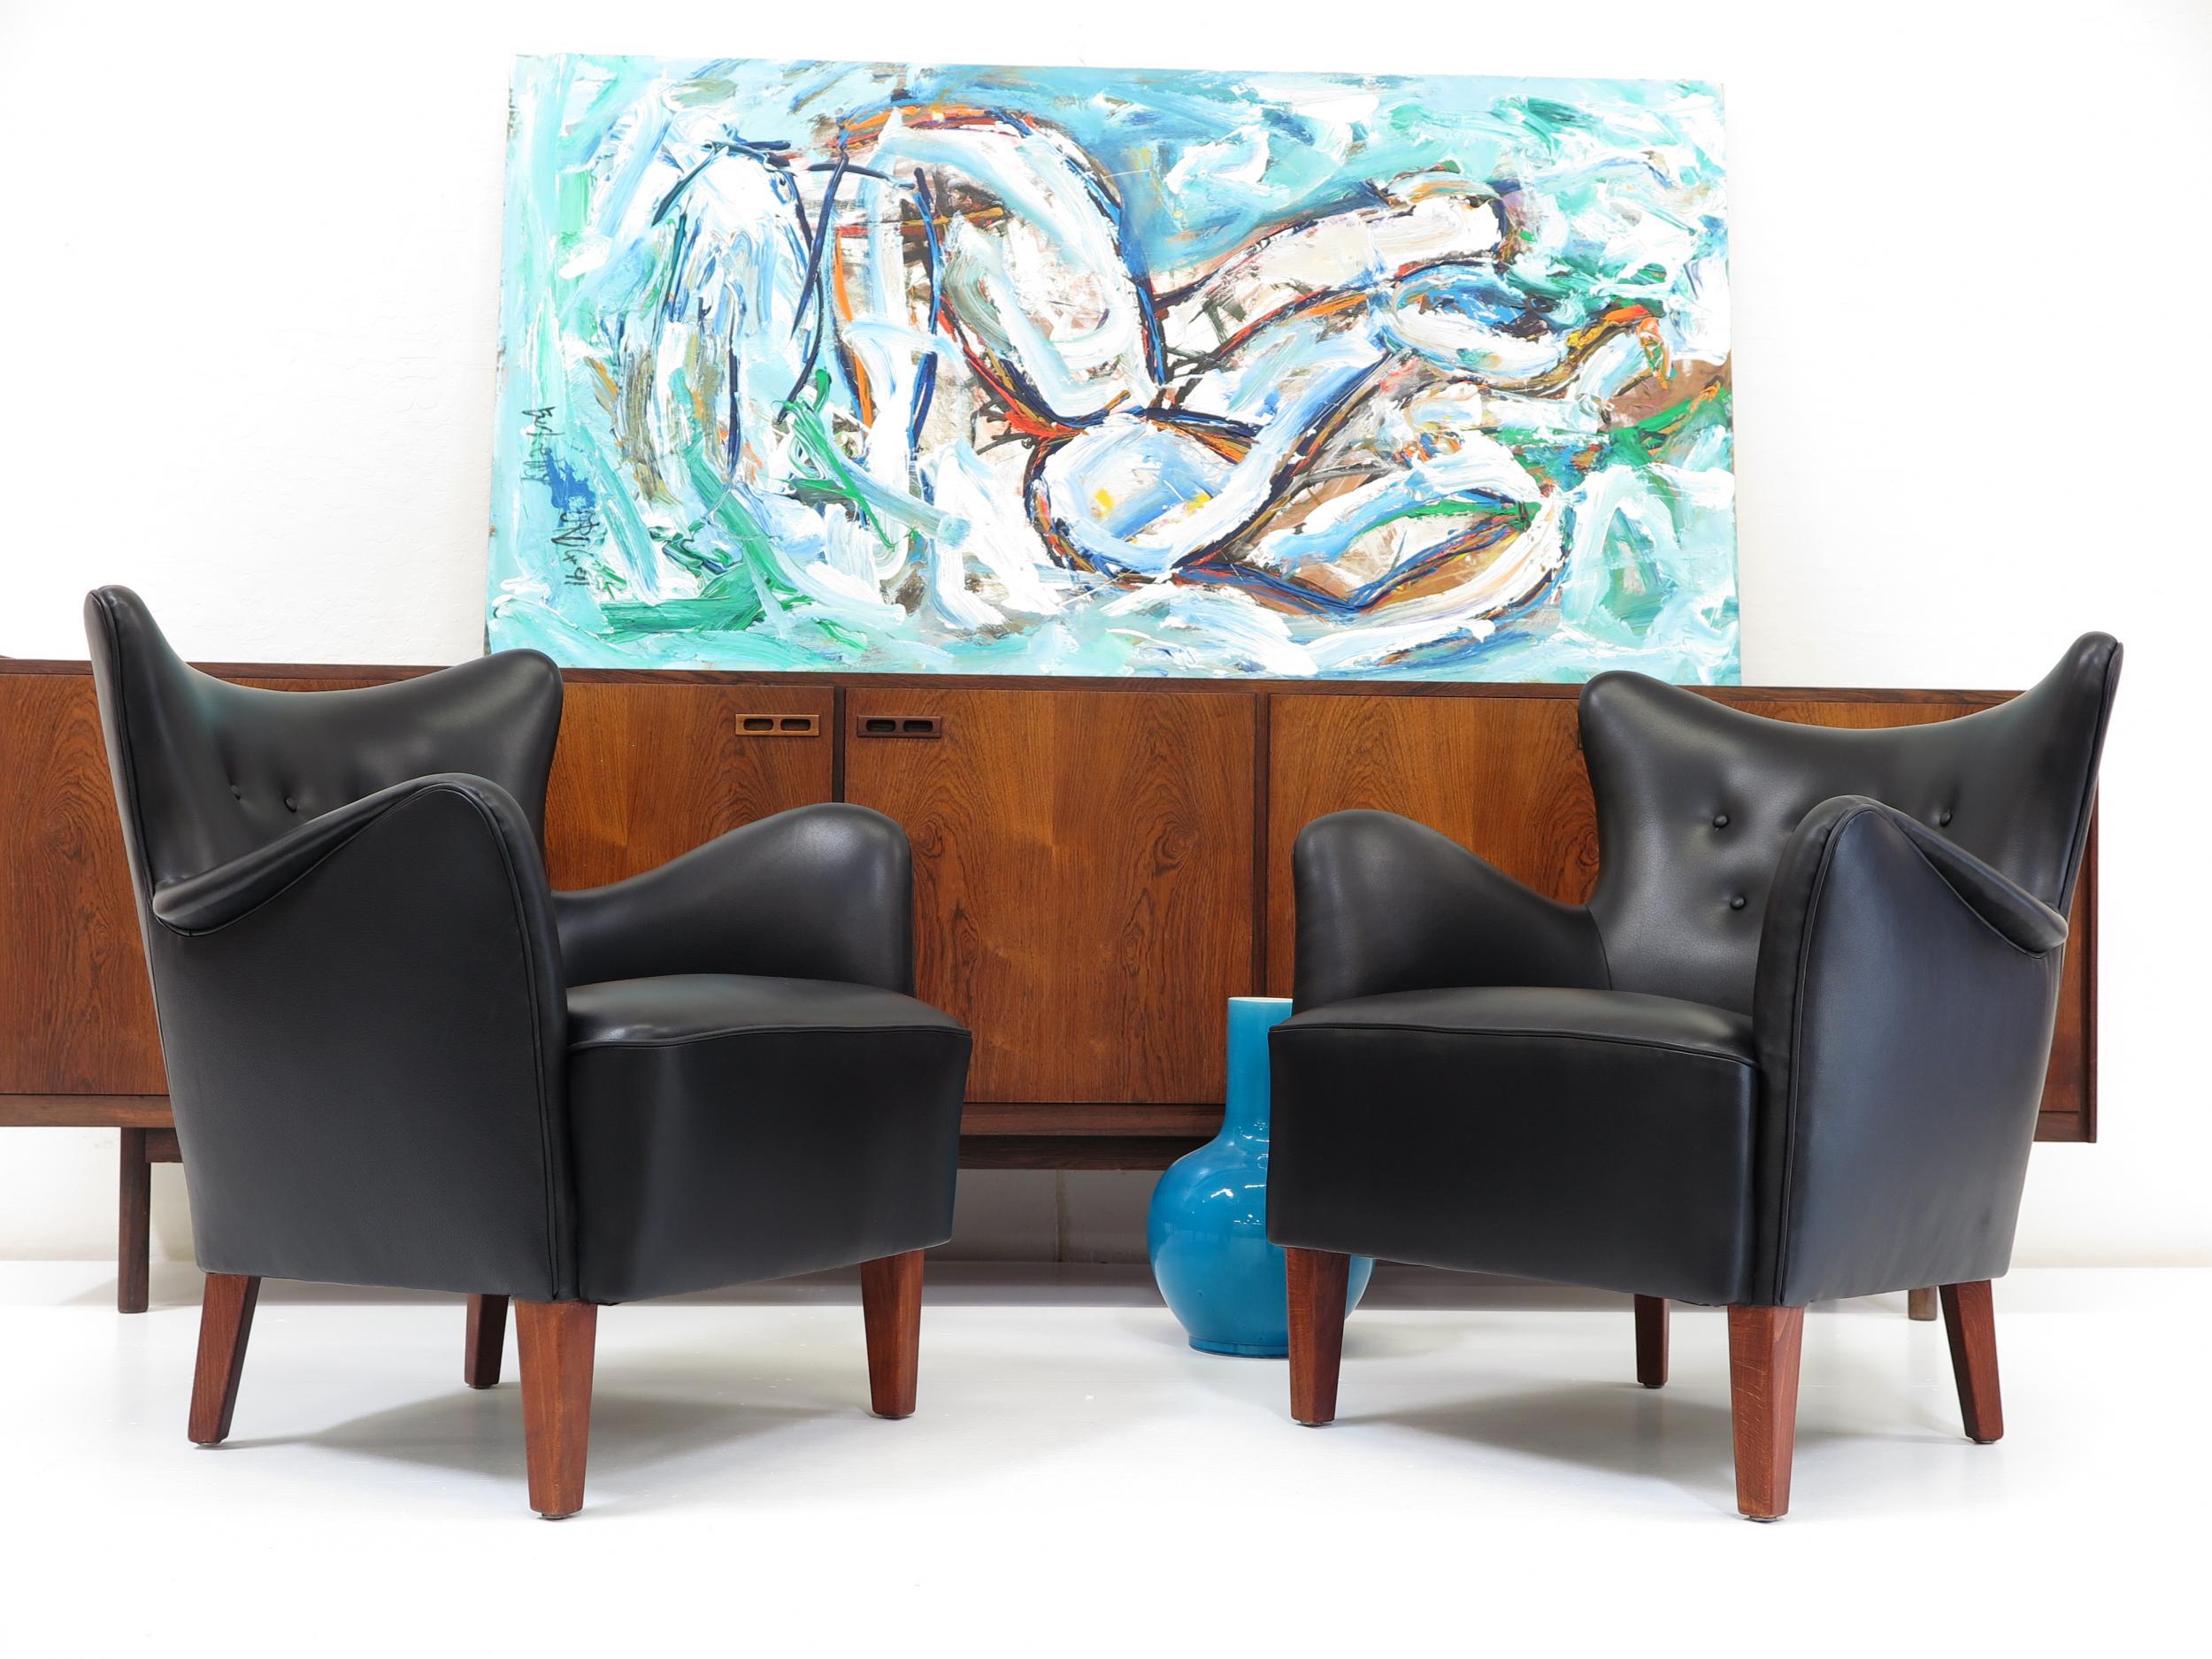 Early Scandinavian lounge chairs designed by master cabinetmaker Frits Henningsen, Denmark. Hand-crafted hardwood frames with superior joinery, newly upholstered in a fine black leather over eight-way hand tied spring seats and horsehair and cotton